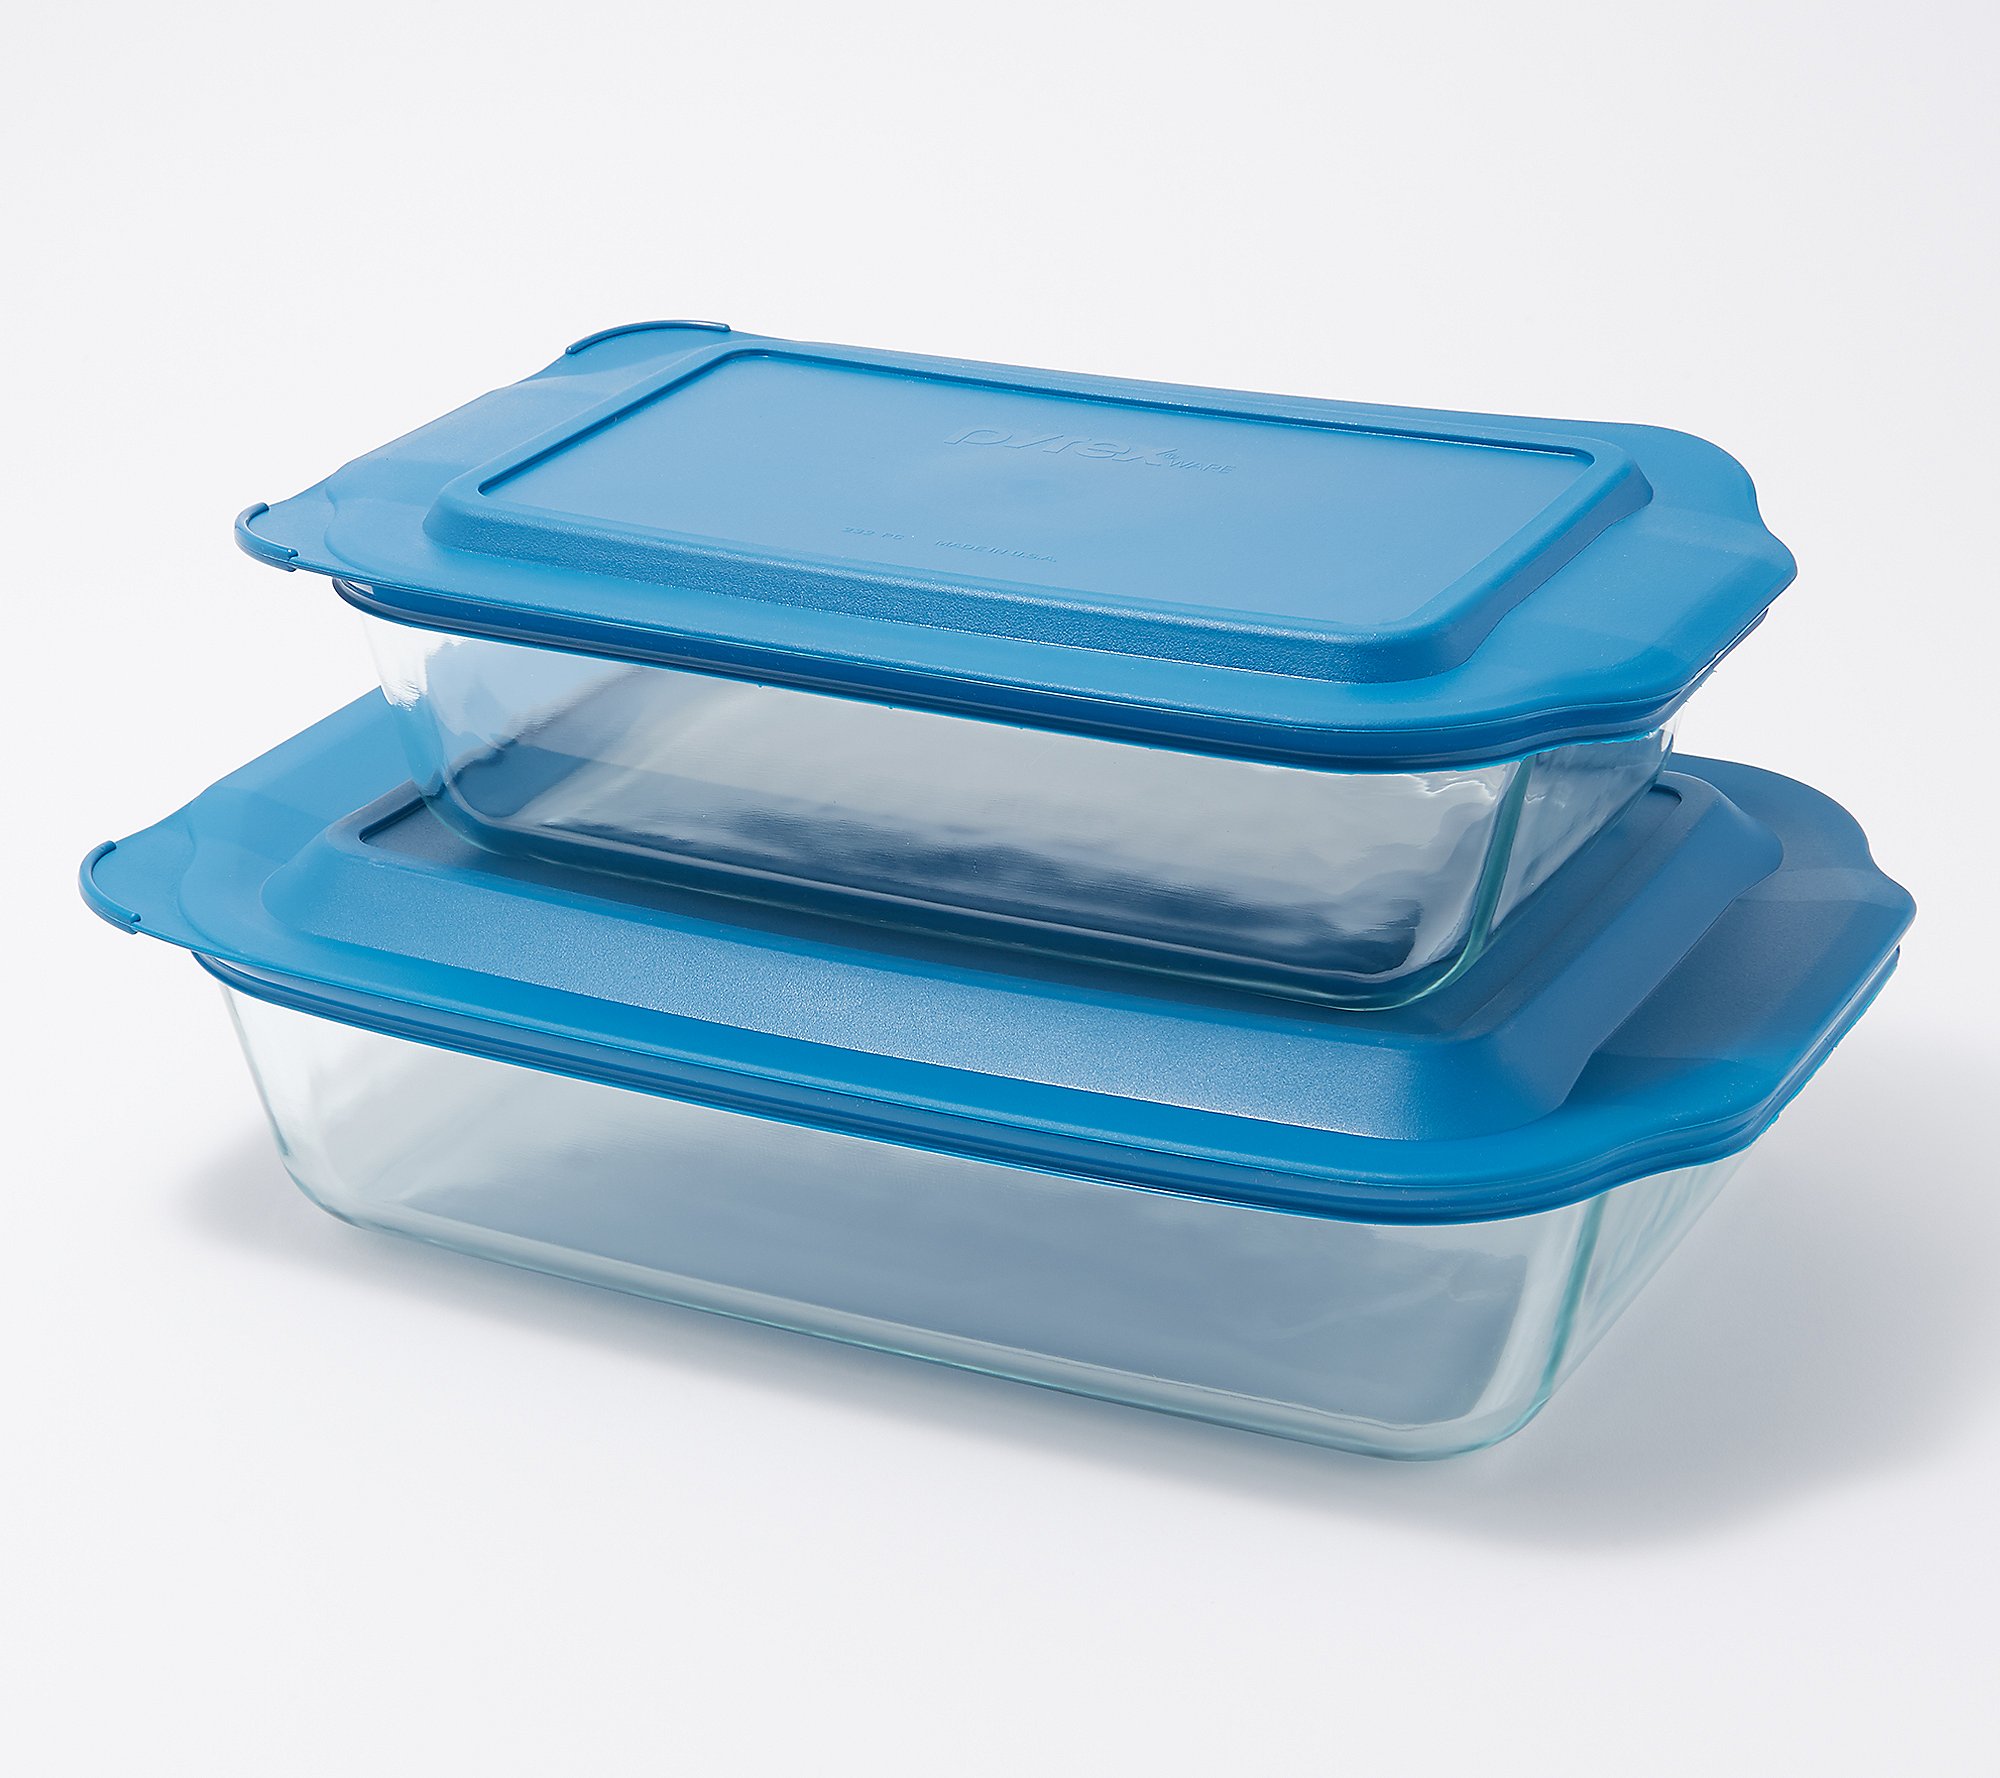 Pyrex 222-PC Dark Blue 2 Quart 8 x 8 Plastic Lid for # 222 Glass Bakeware Dish 1 Will NOT fit # 2222 Bakeware Dish Will NOT fit Pyrex Easy Grab Dishes